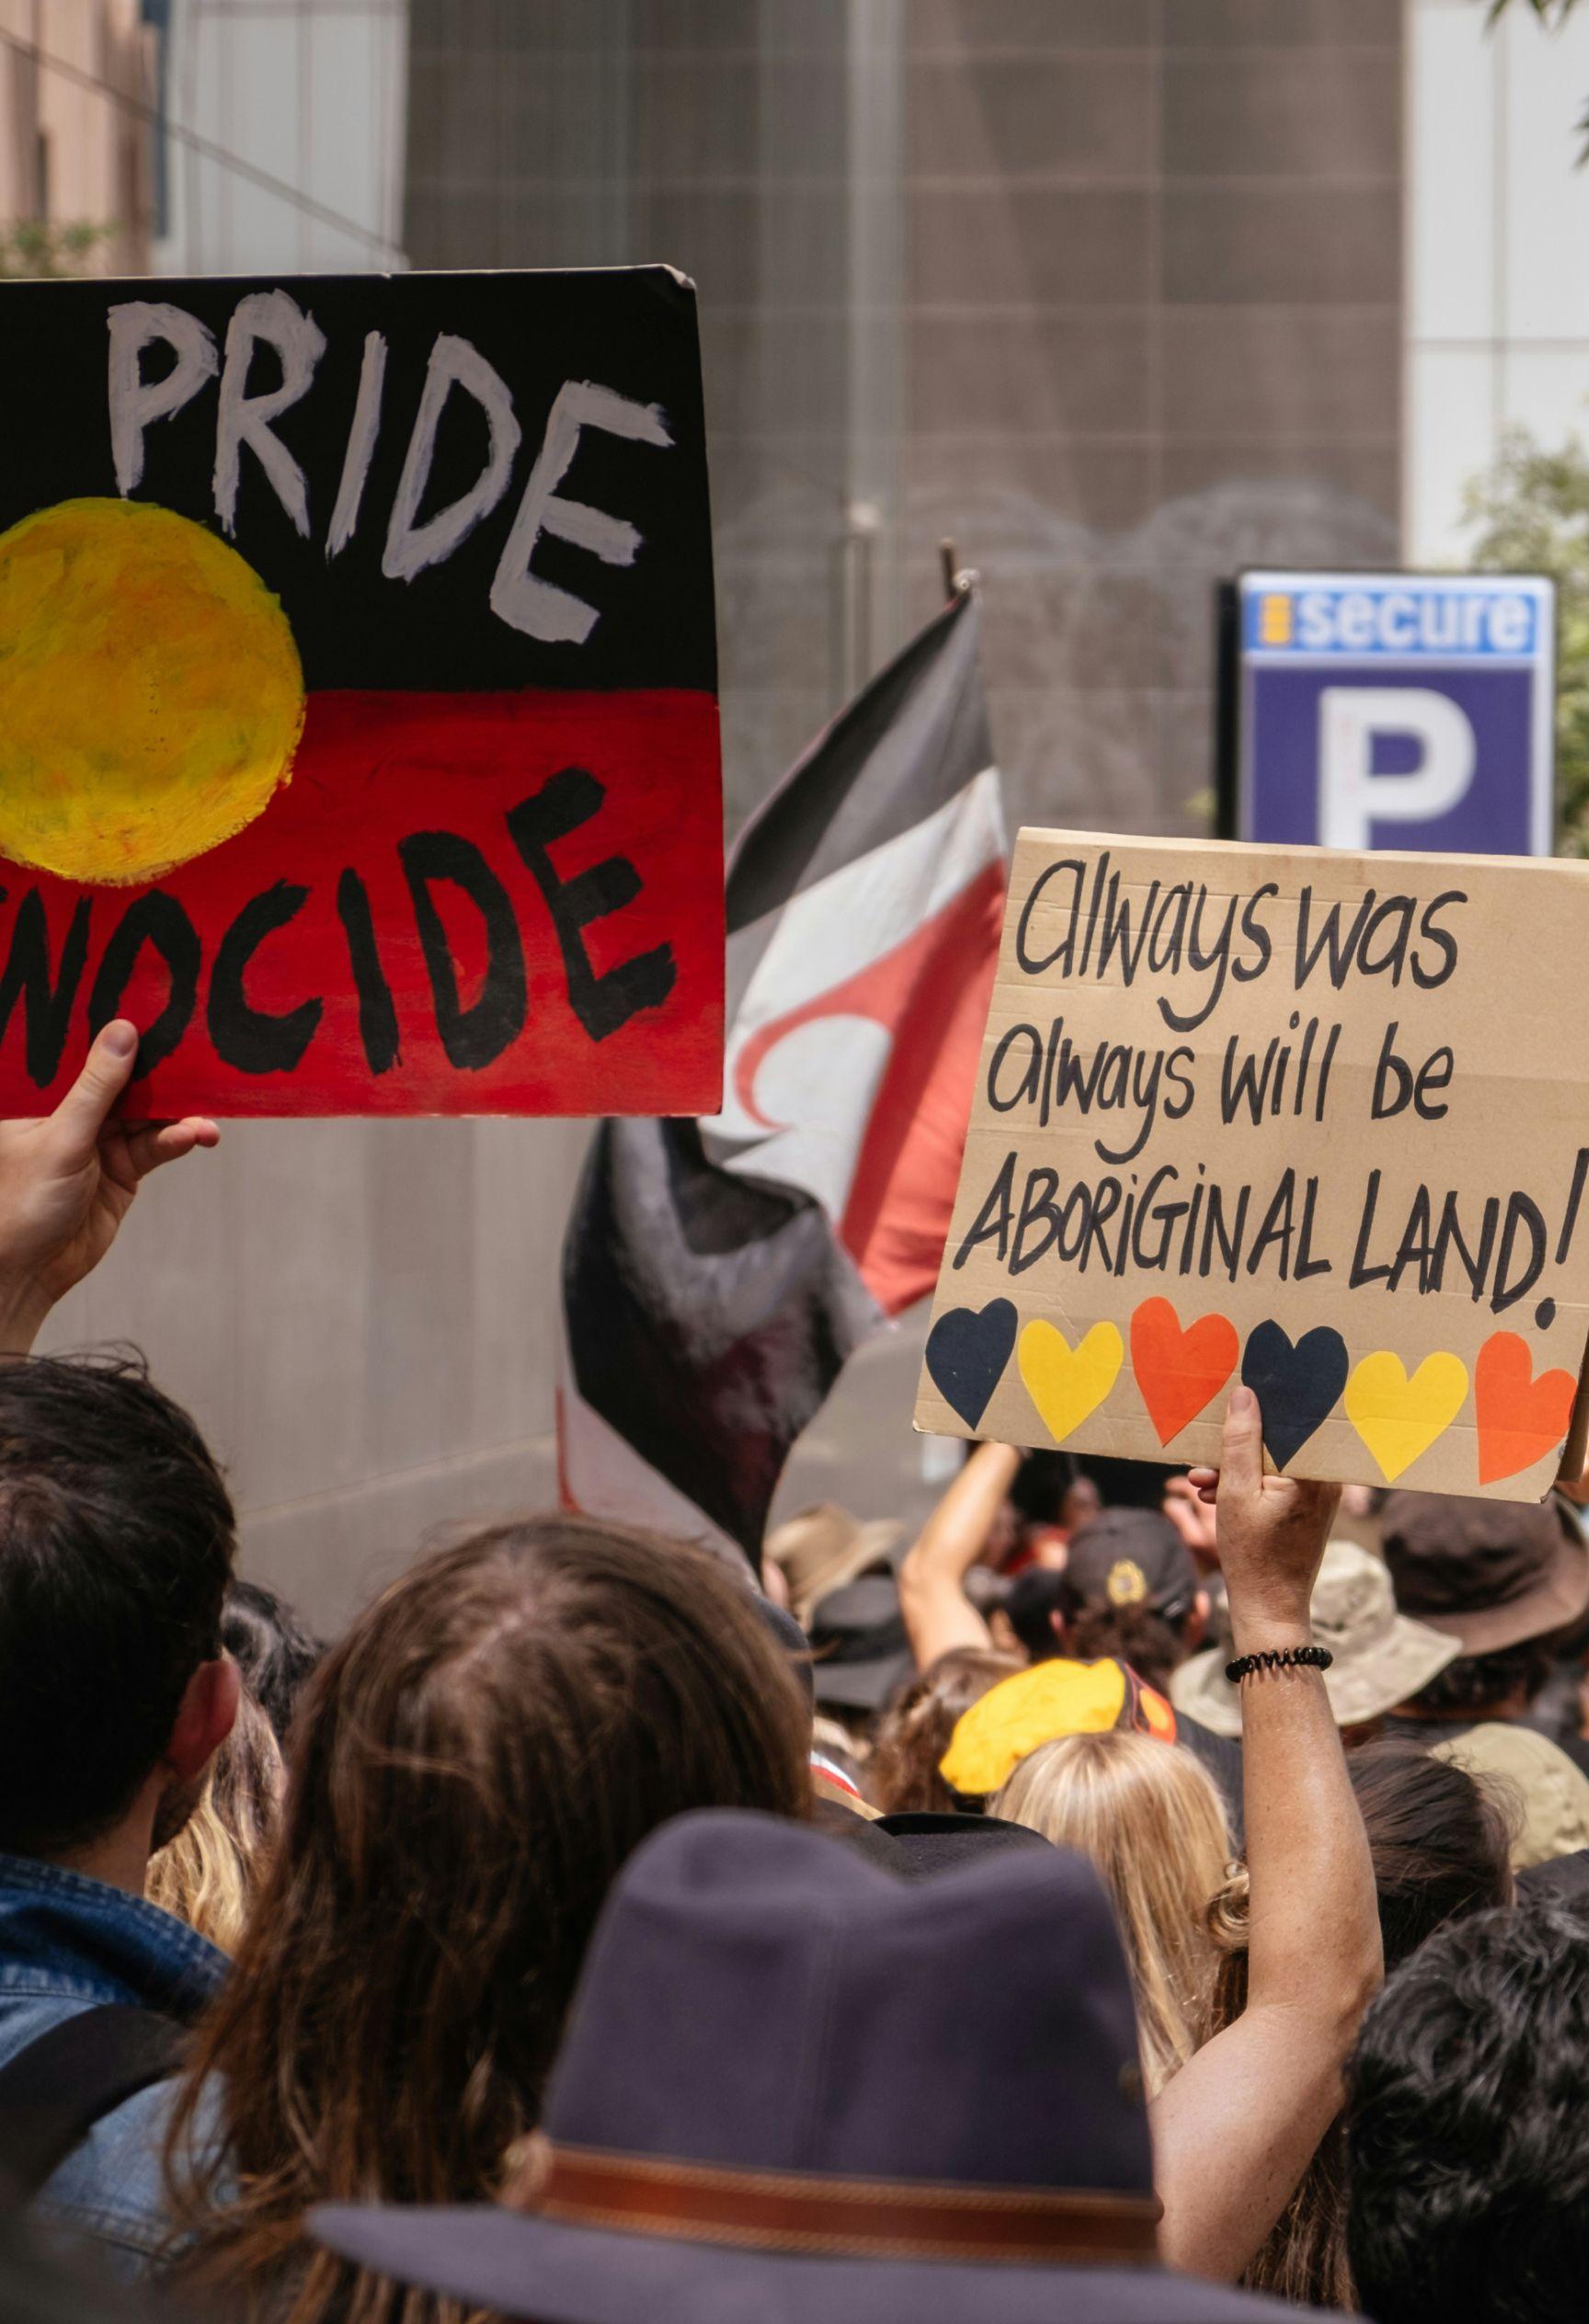 An image from an Invasion Day rally in Melbourne, January 26 2020. People are holding signs reading "Always was, always will be Aboriginal land" and "No pride in genocide".